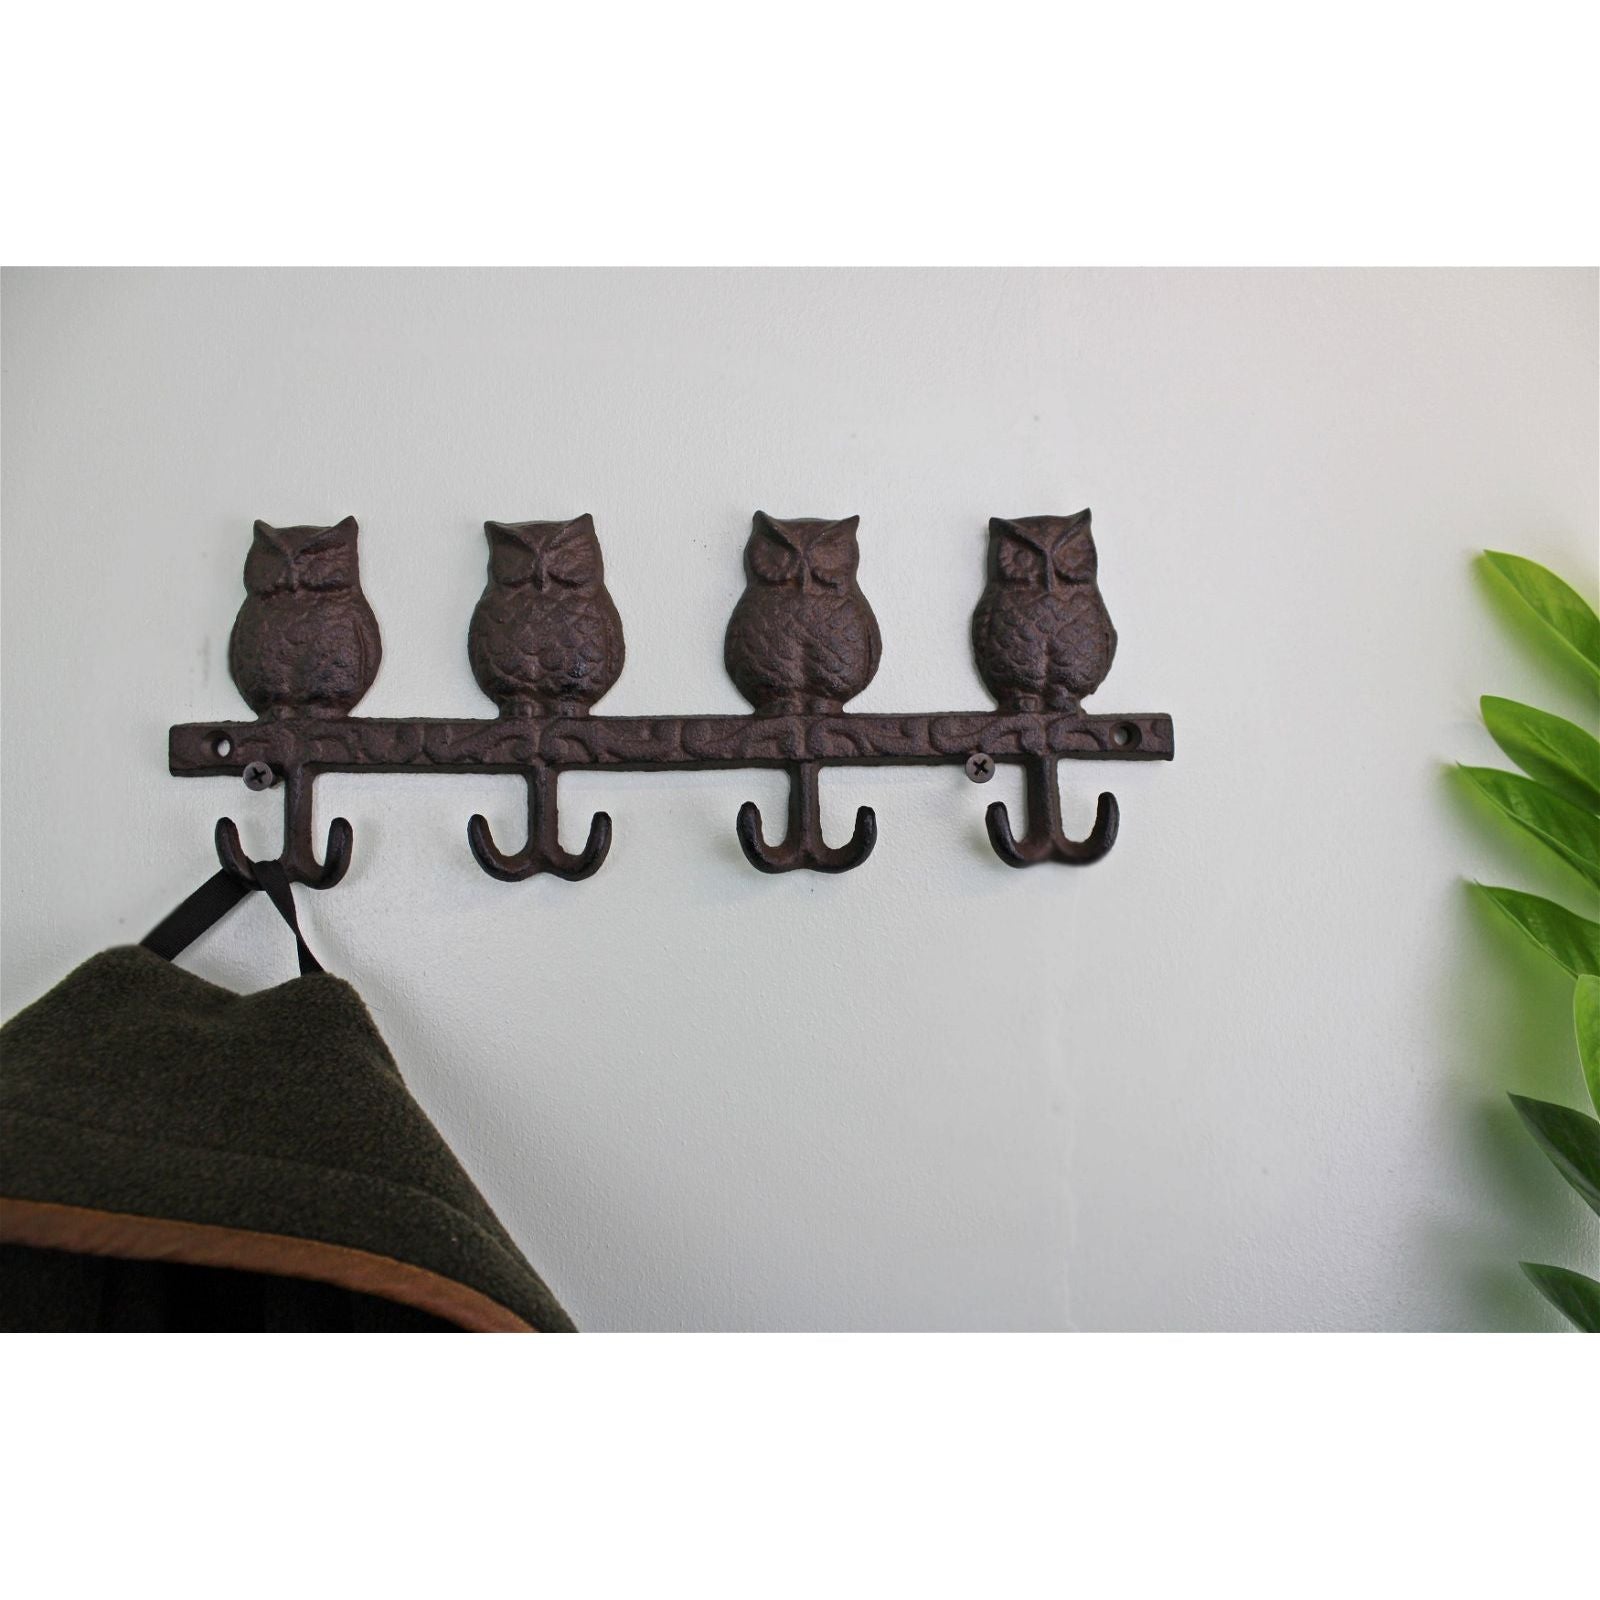 Rustic Cast Iron Wall Hooks, Owls - Ashton and Finch